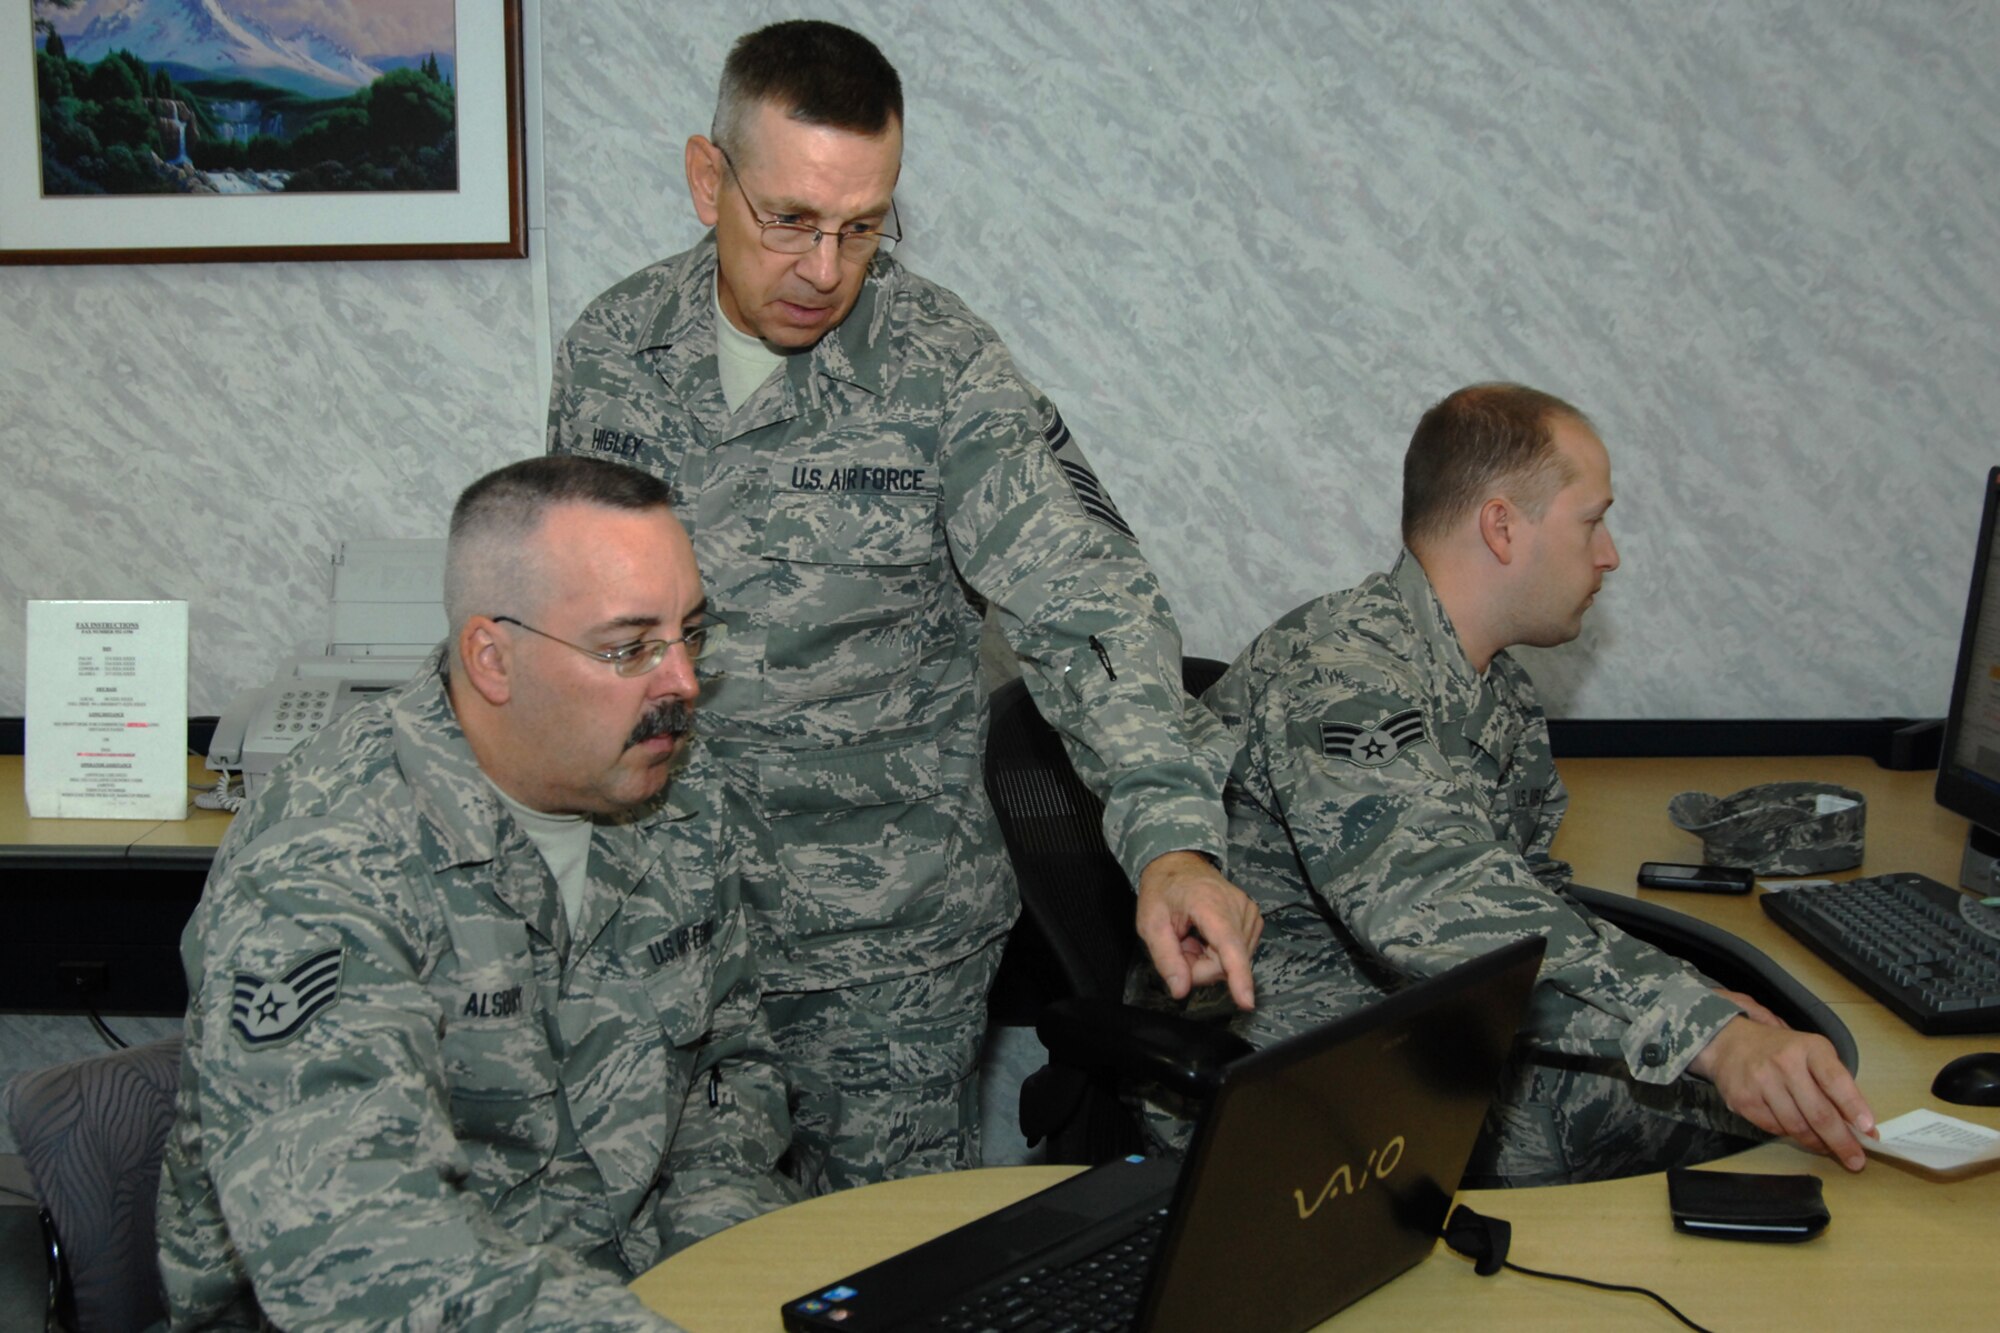 Staff Sgt. Jeffrey Alsbury, Senior Master Sgt. Denver Higley, and Senior Amn. Donald Russell,  logistic planners for the 127th Logistics Readiness Squadron, work on deployable work stations, creating an impromptu logistics office inside the lobby of the North Star Inn, at Elmendorf Air Base, Alaska.  They are seen here preparing the X-Man list of 127th LRS personnel which will be used to create a passenger manifest upon redeployment back to Selfridge, ANGB, Mich., where the 127th is based as part of the Michigan Air National Guard. In late July and early August, approximately 40 Airmen from the 127th LRS spent their two weeks of annual training integrated with the active duty and guard personnel of Joint Base Elmendorf/Ft. Richardson, where they accomplished core task training, and shared knowledge and skills with their counterparts.  (USAF Photo by SSgt. Rachel Barton)